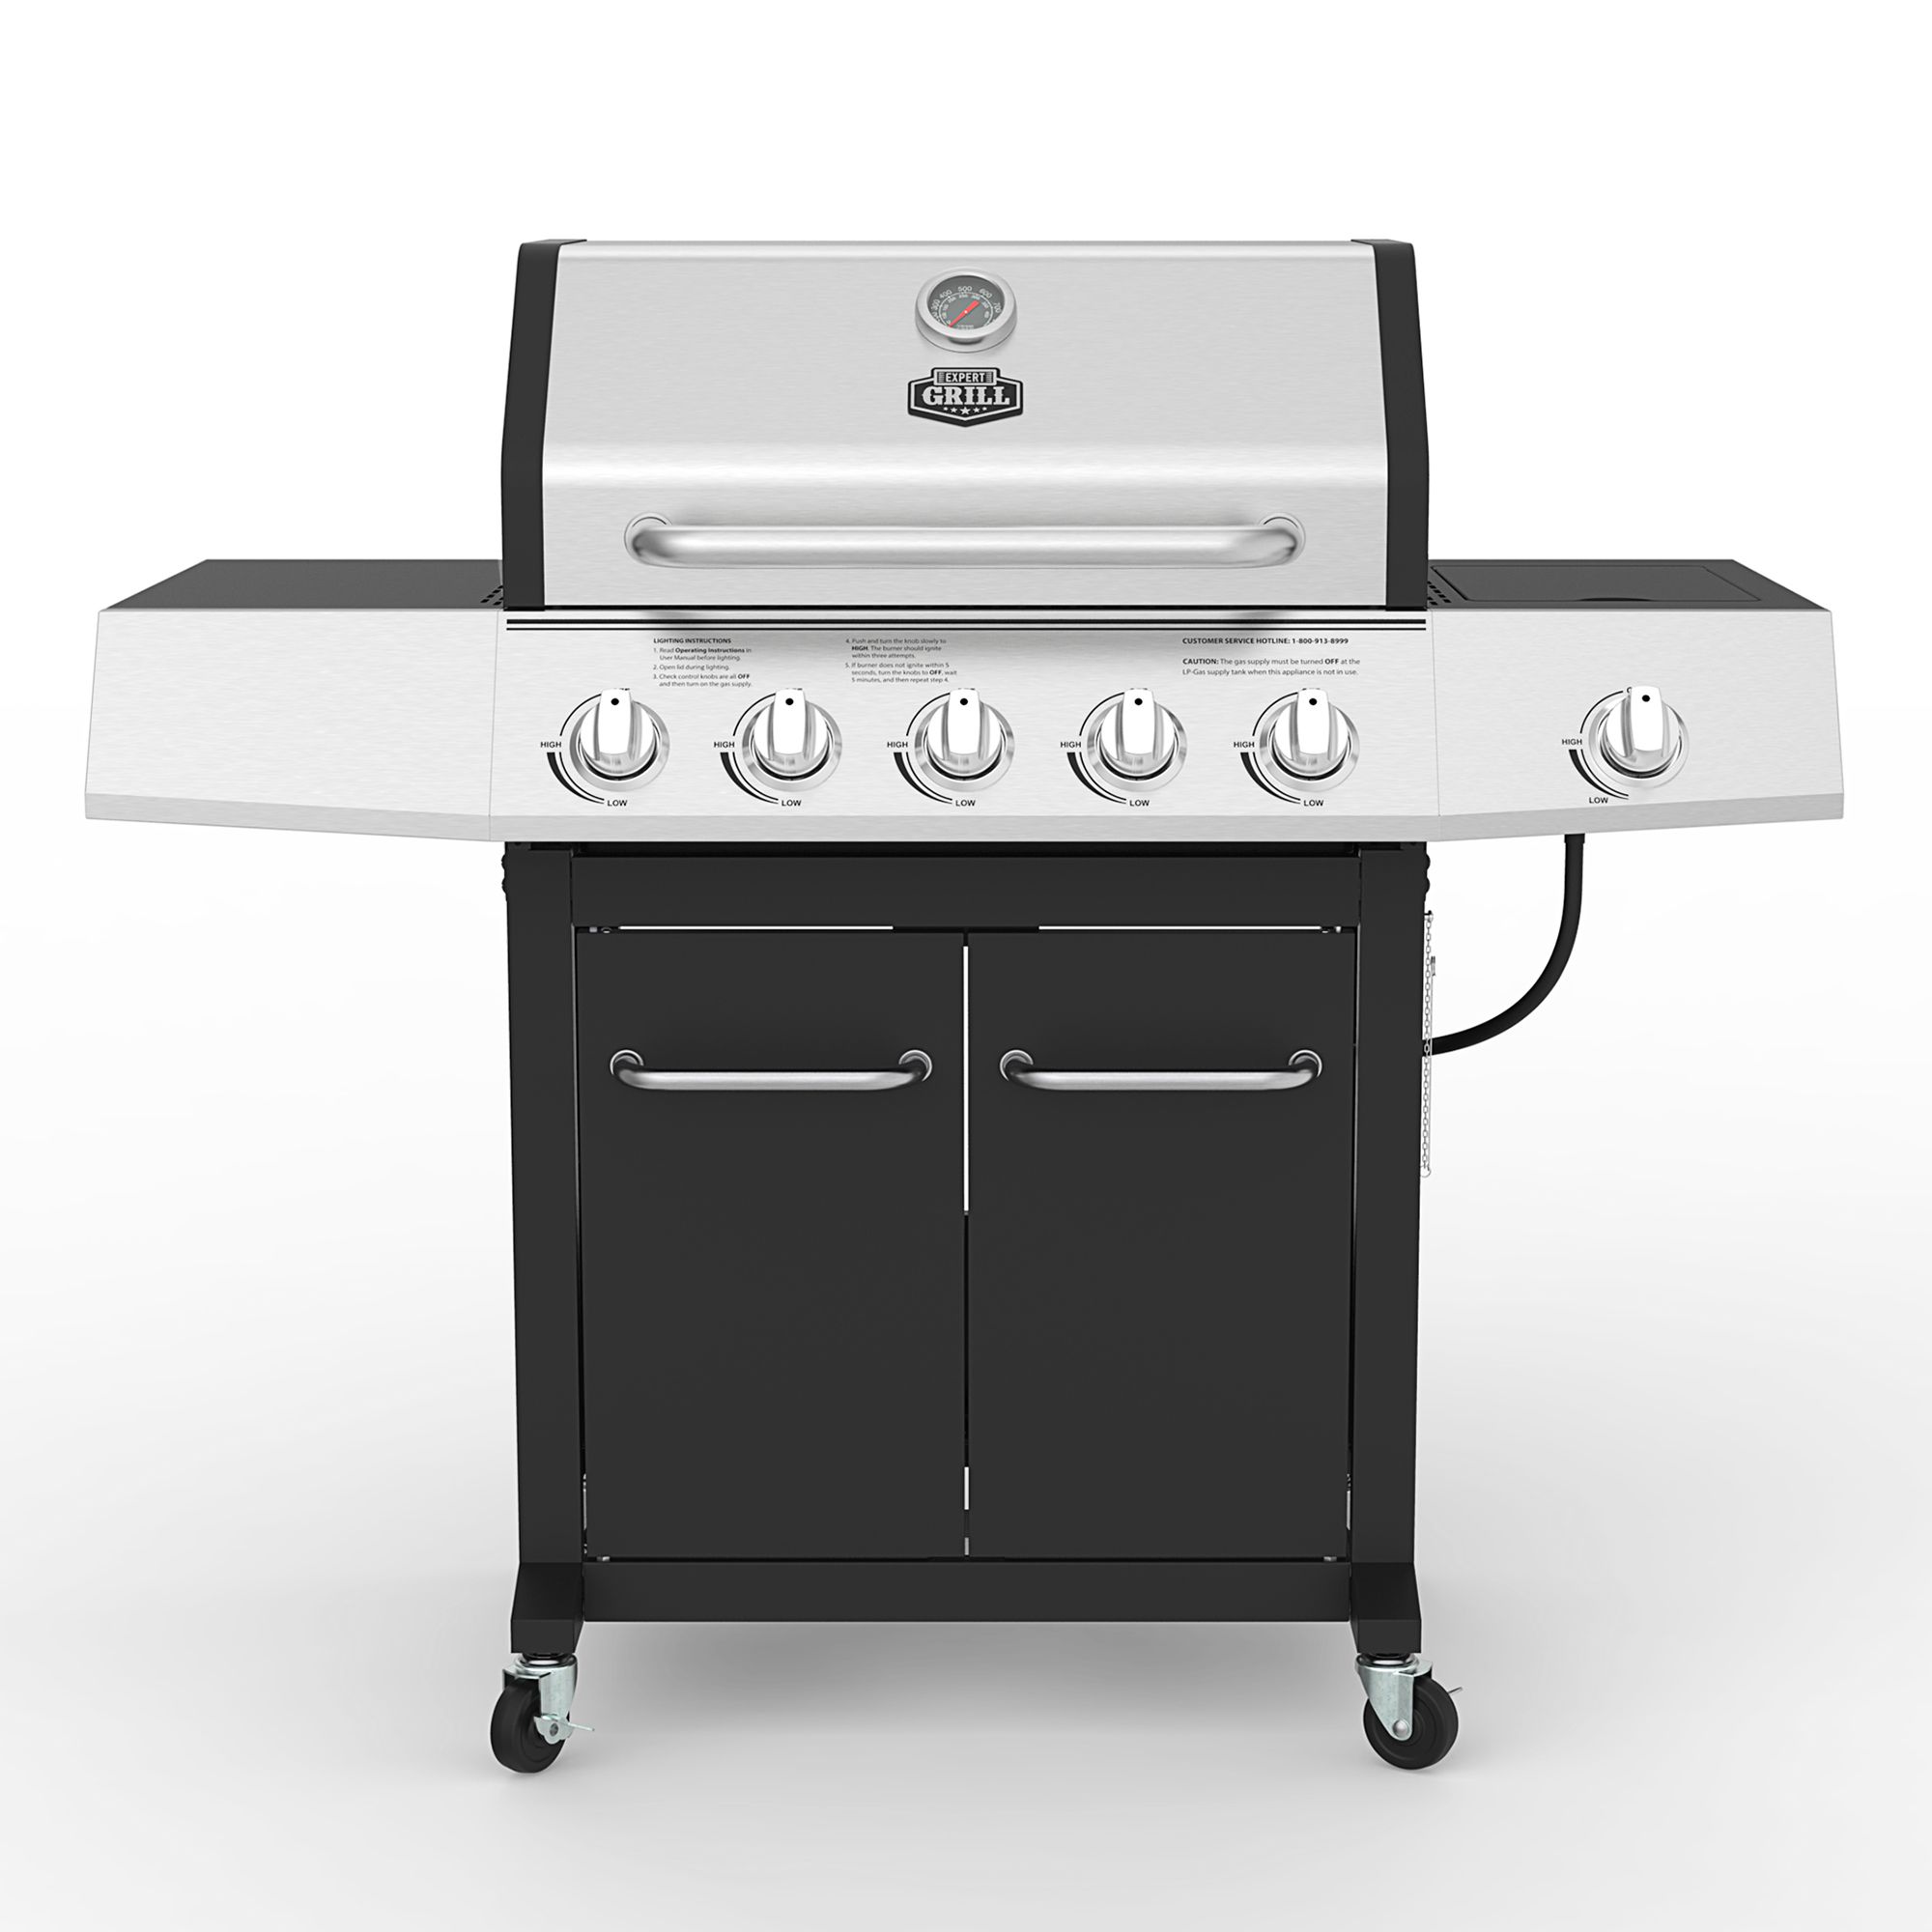 Expert Grill 5 Burner Propane Gas Grill With Side Burner Walmart Com Walmart Com,How To Find An Apartment In Los Angeles